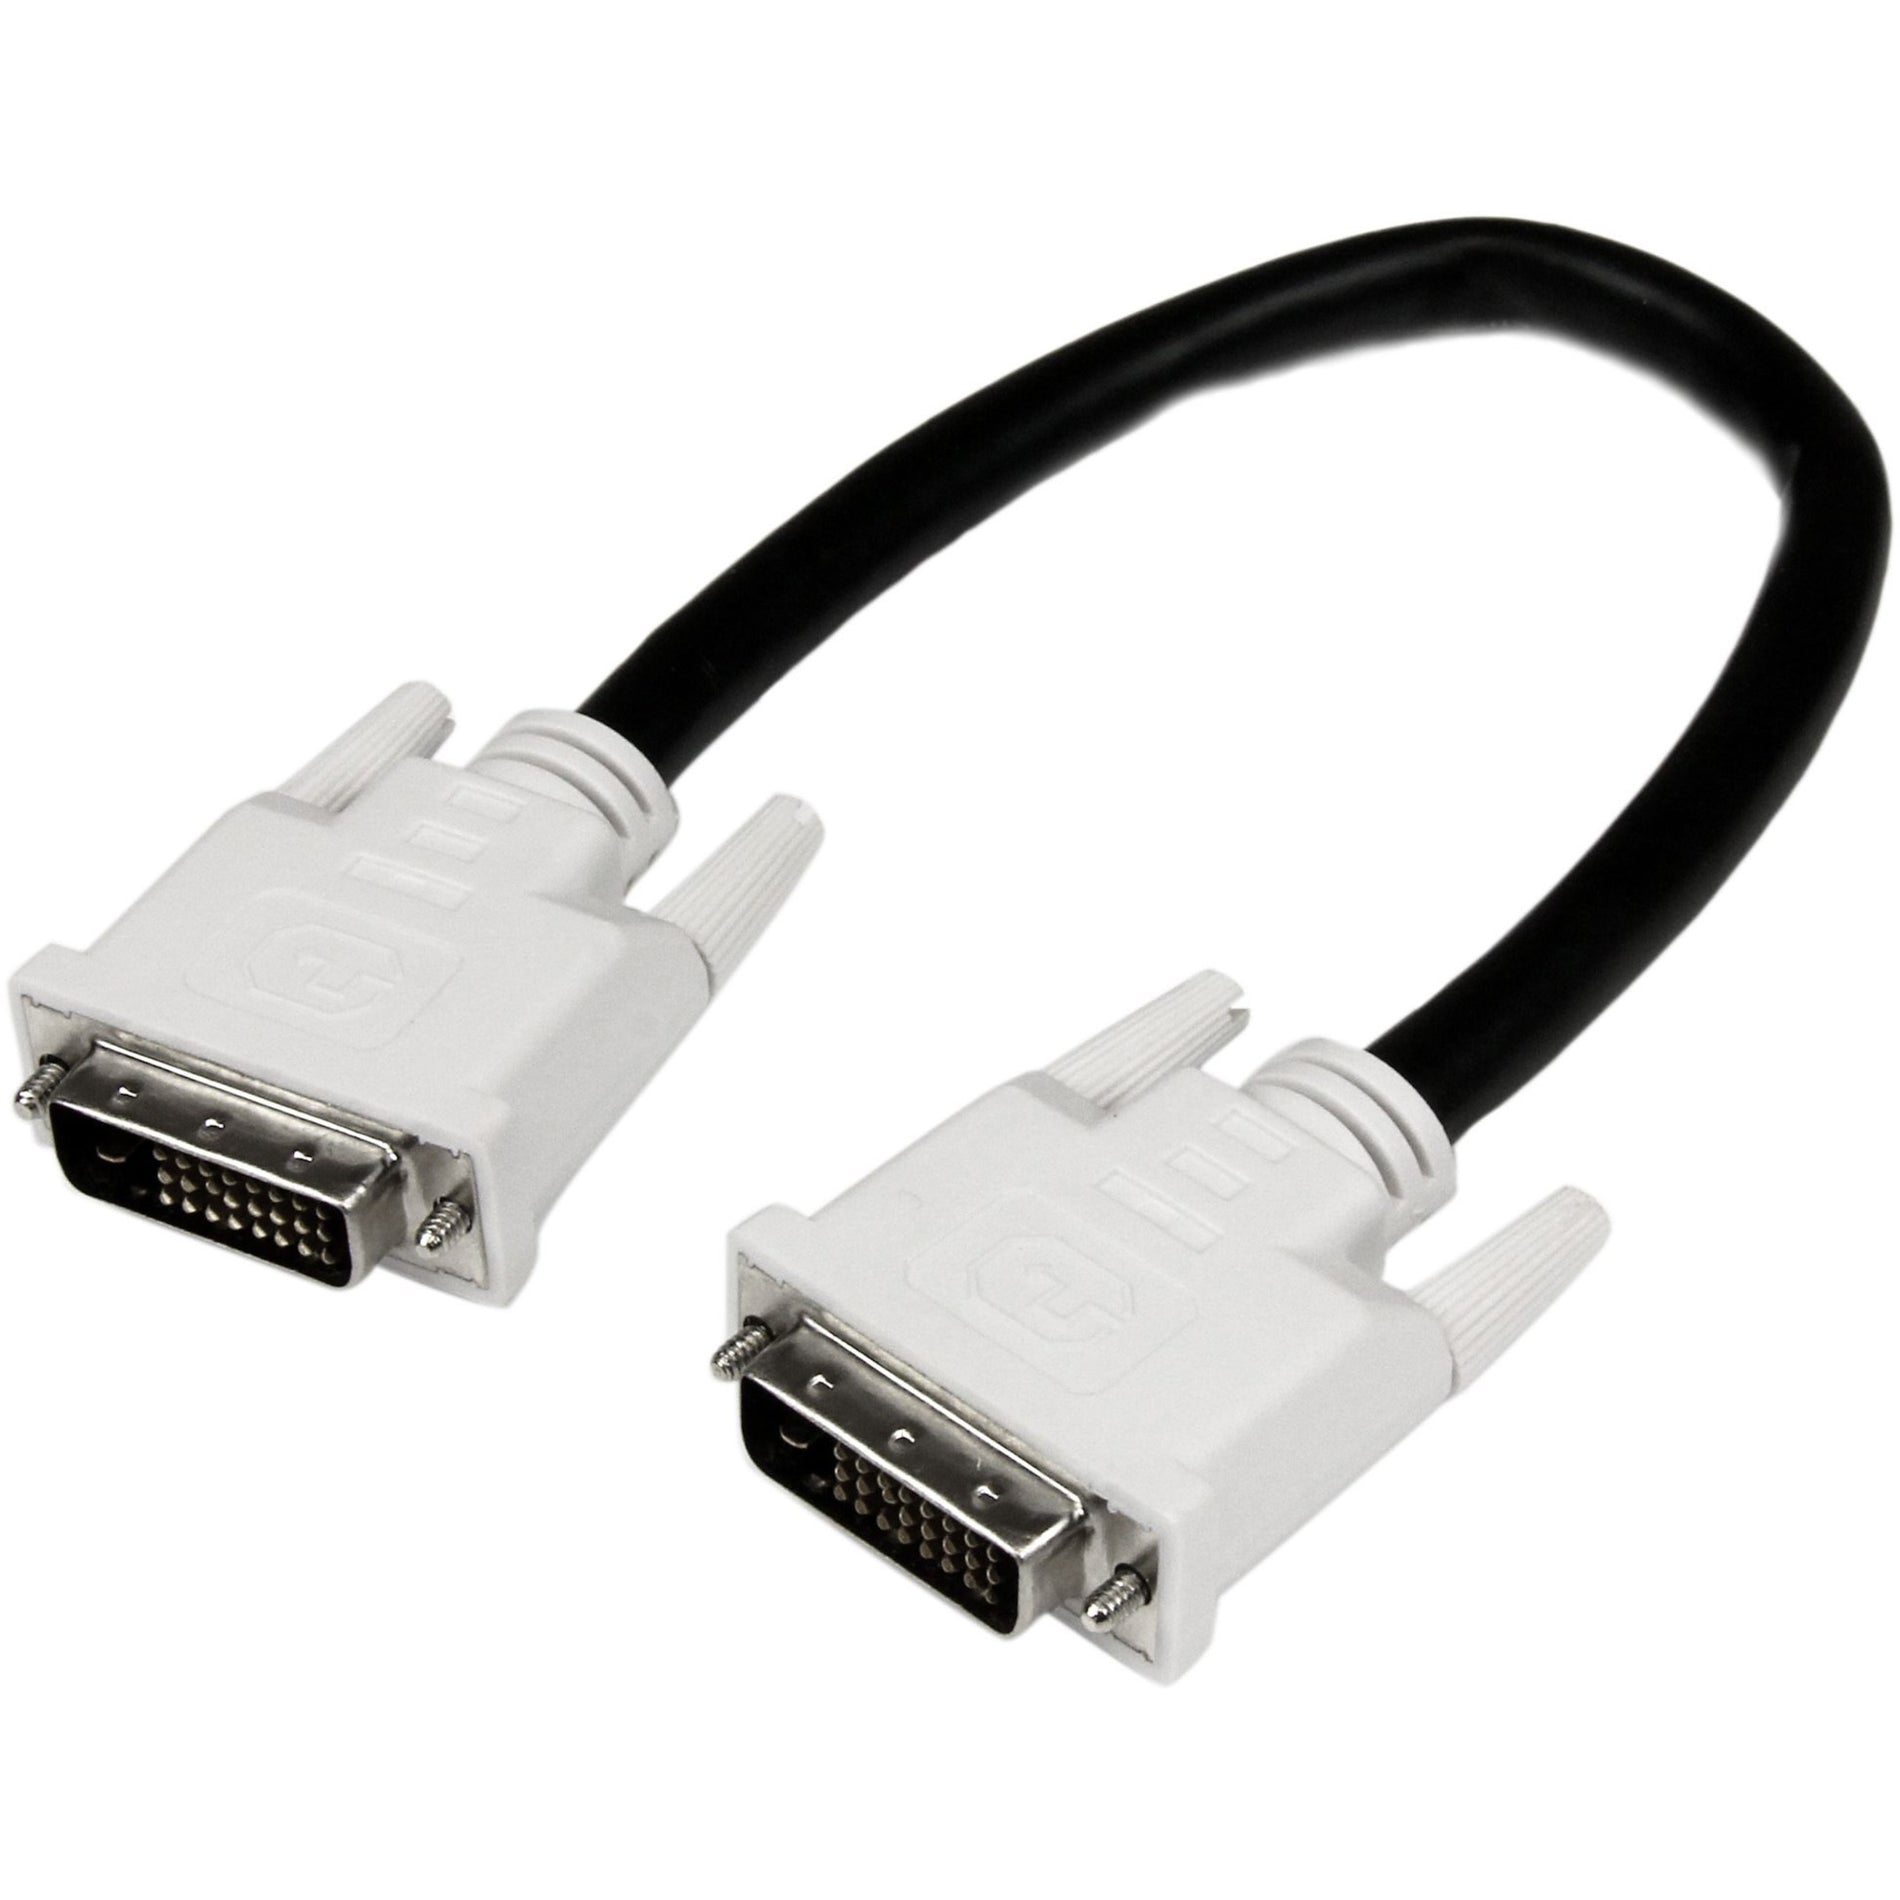 StarTech.com DVIDDMM1 1ft DVI-D Dual Link Digital Video Monitor Cable, EMI Protection, 9.9 Gbit/s Data Transfer Rate, 2560 x 1600 Supported Resolution